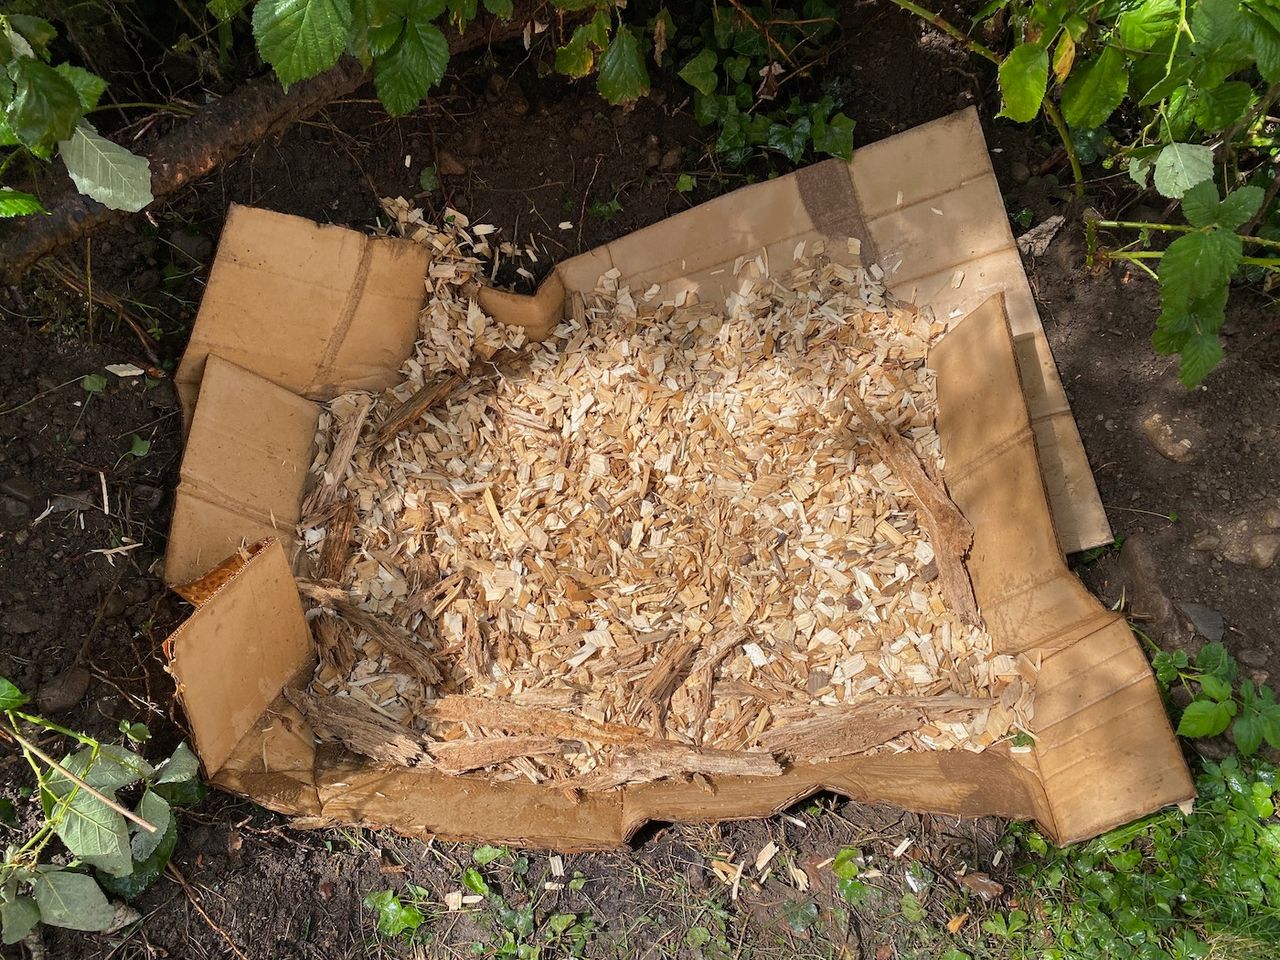 Cardboard and wood chips covering the exposed soil.